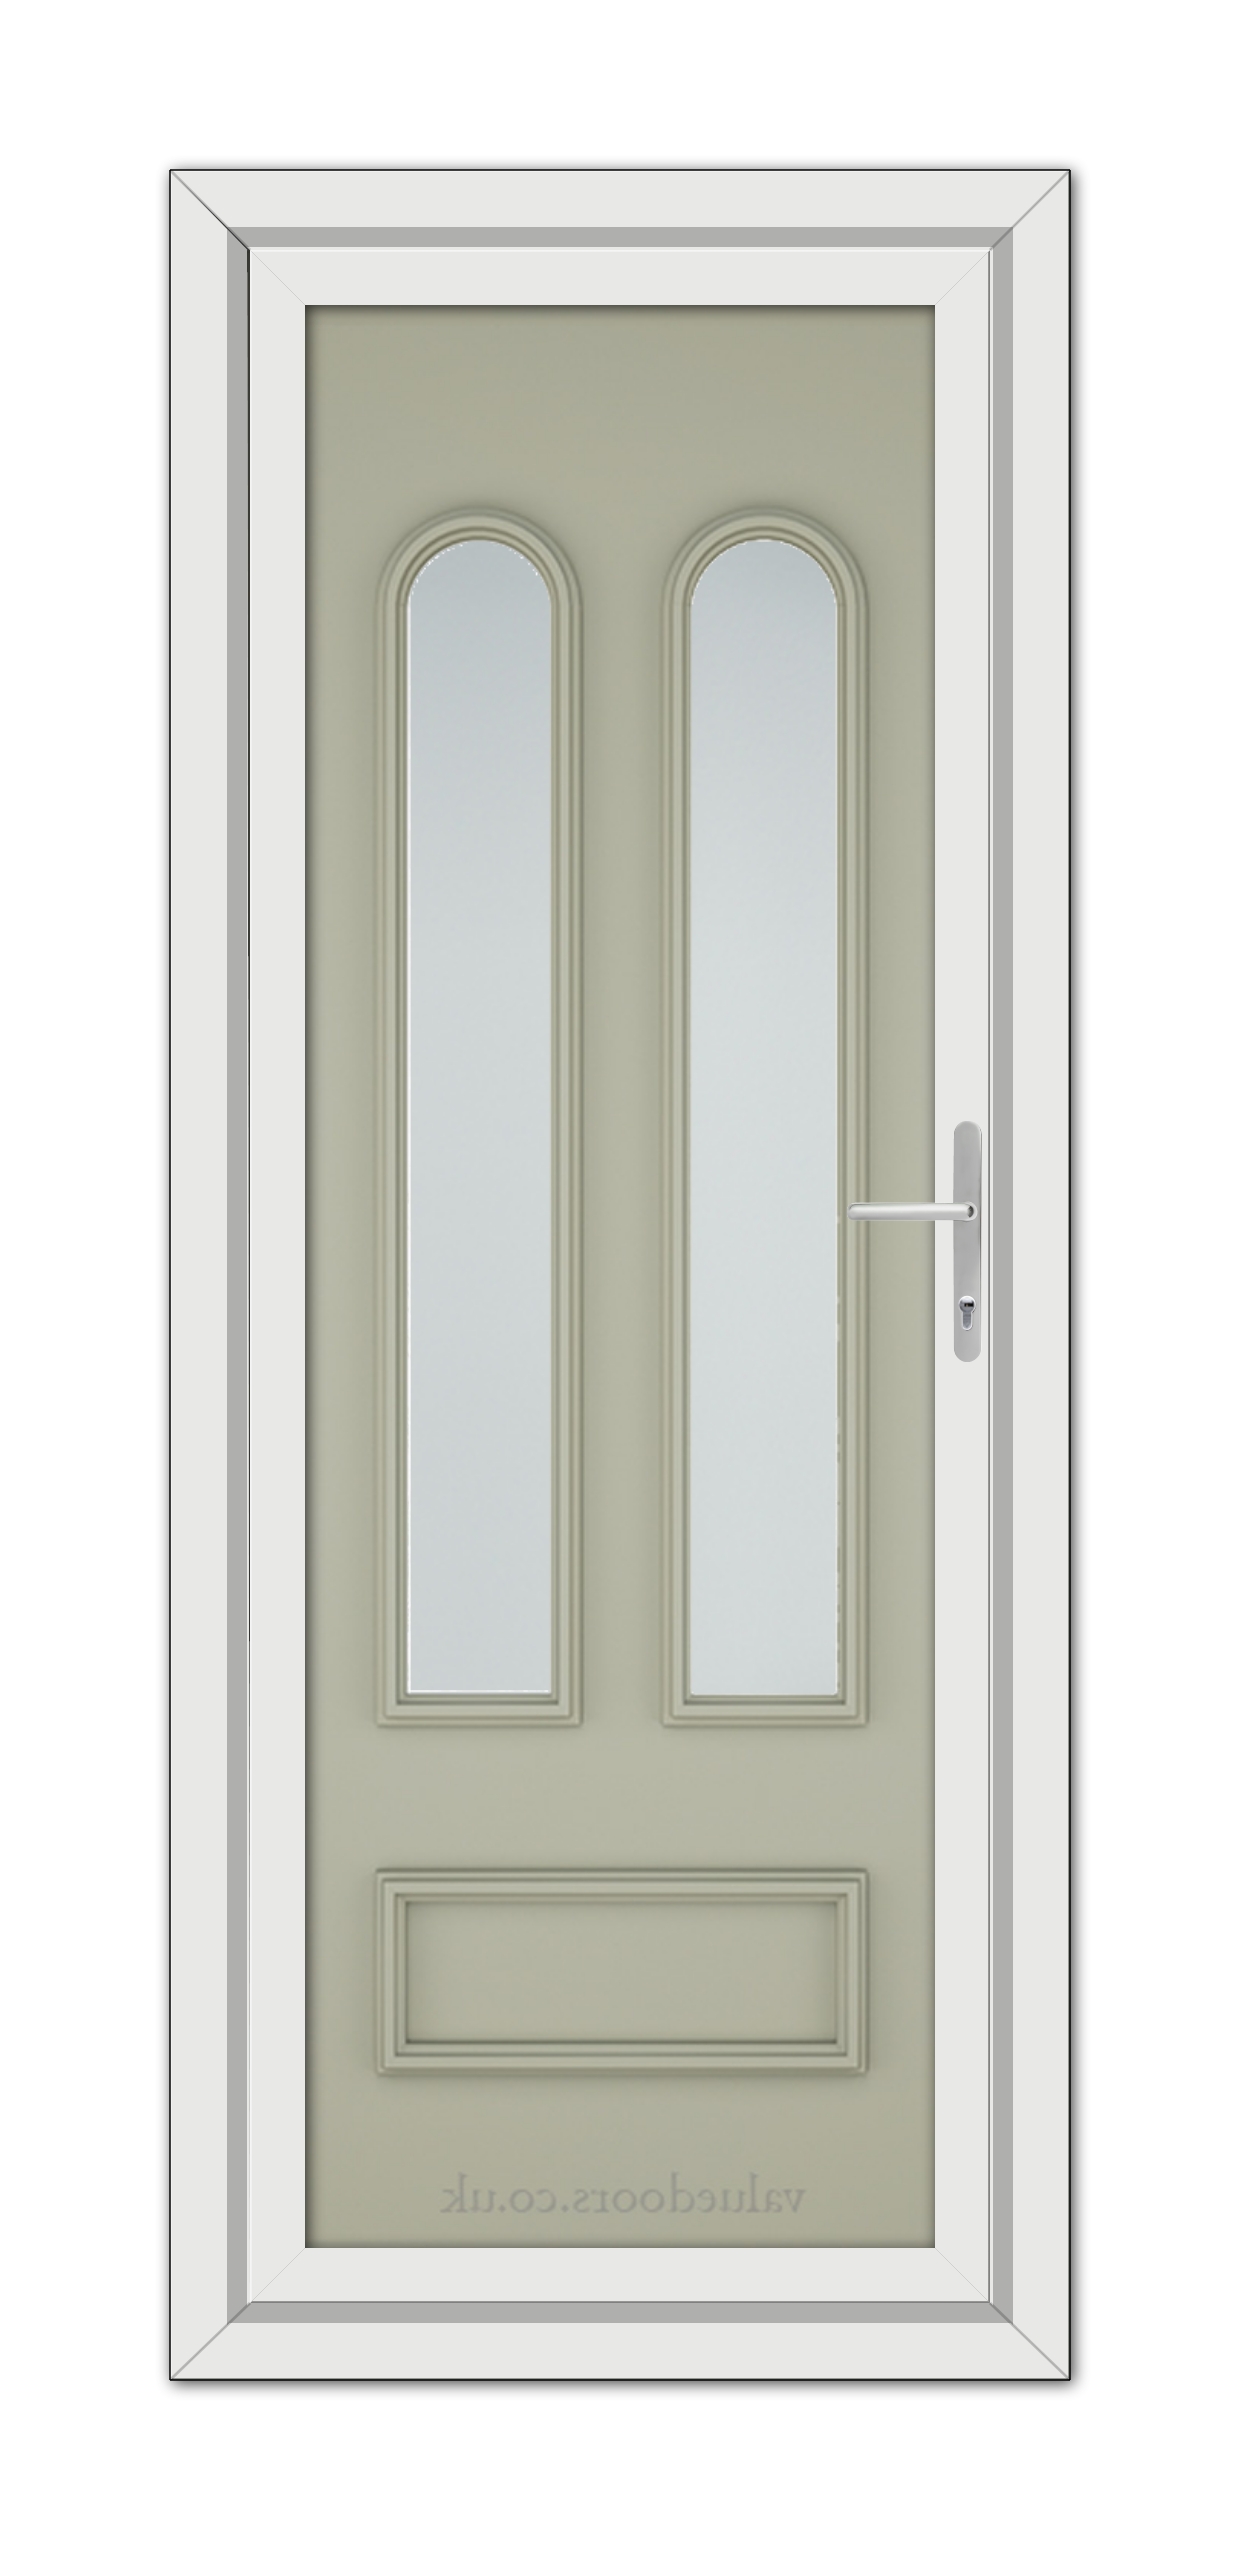 A modern Agate Grey Madrid uPVC door featuring two vertical glass panels and a silver handle, set within a white frame.